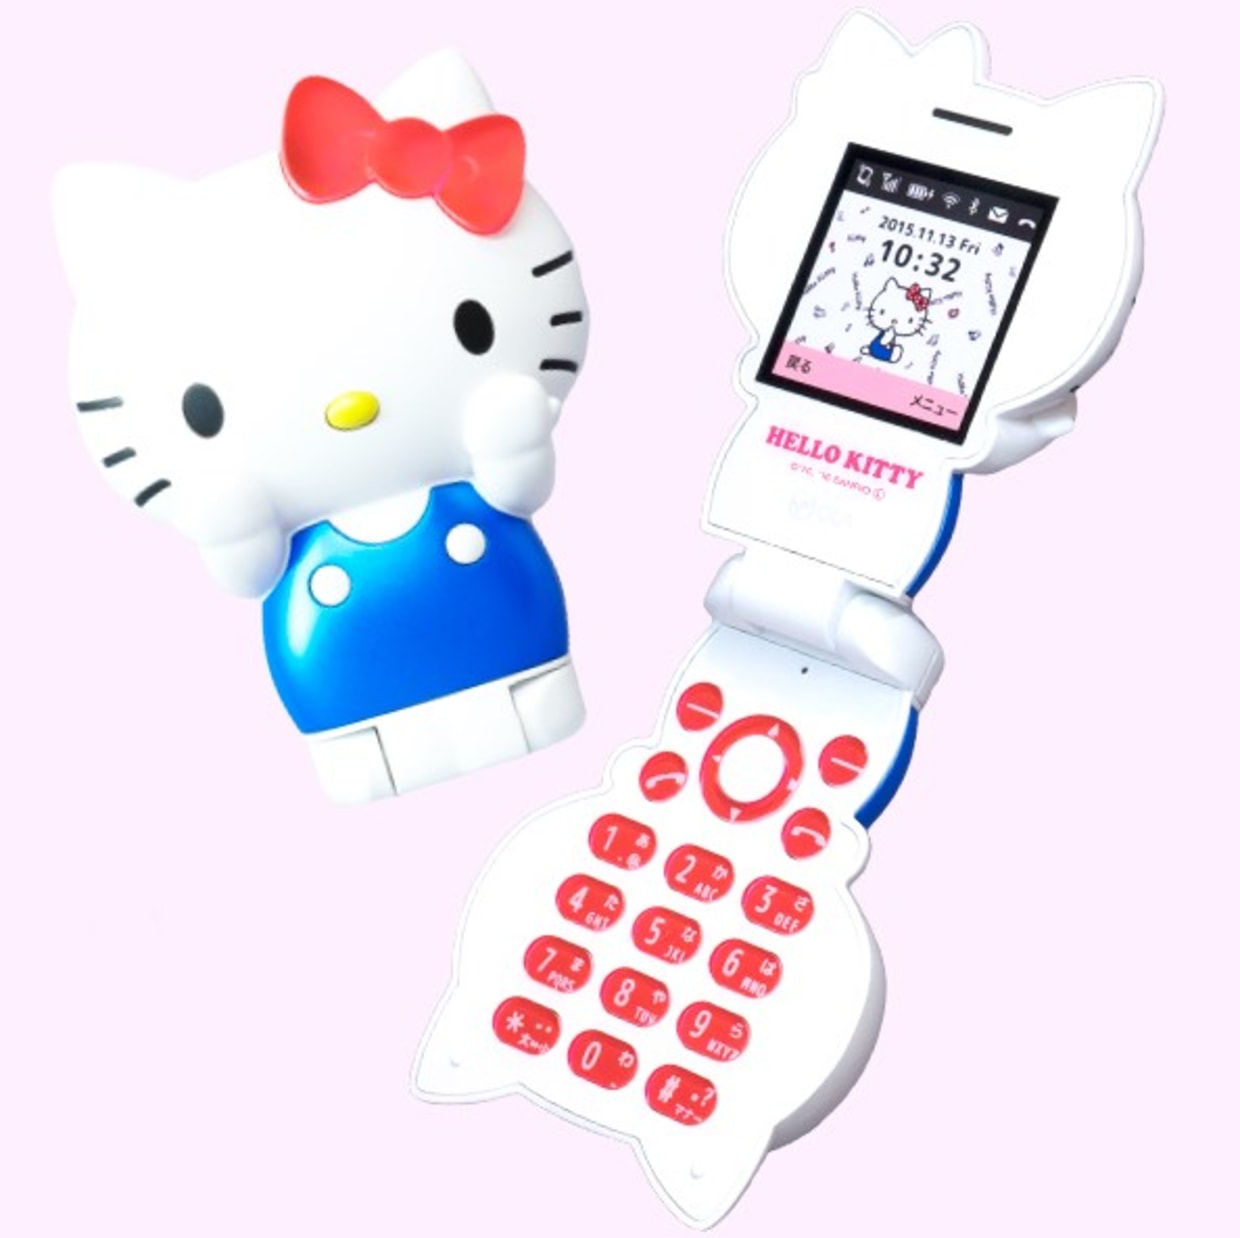 Hello, Kitty? This Not-So-Smart Phone is Adorable